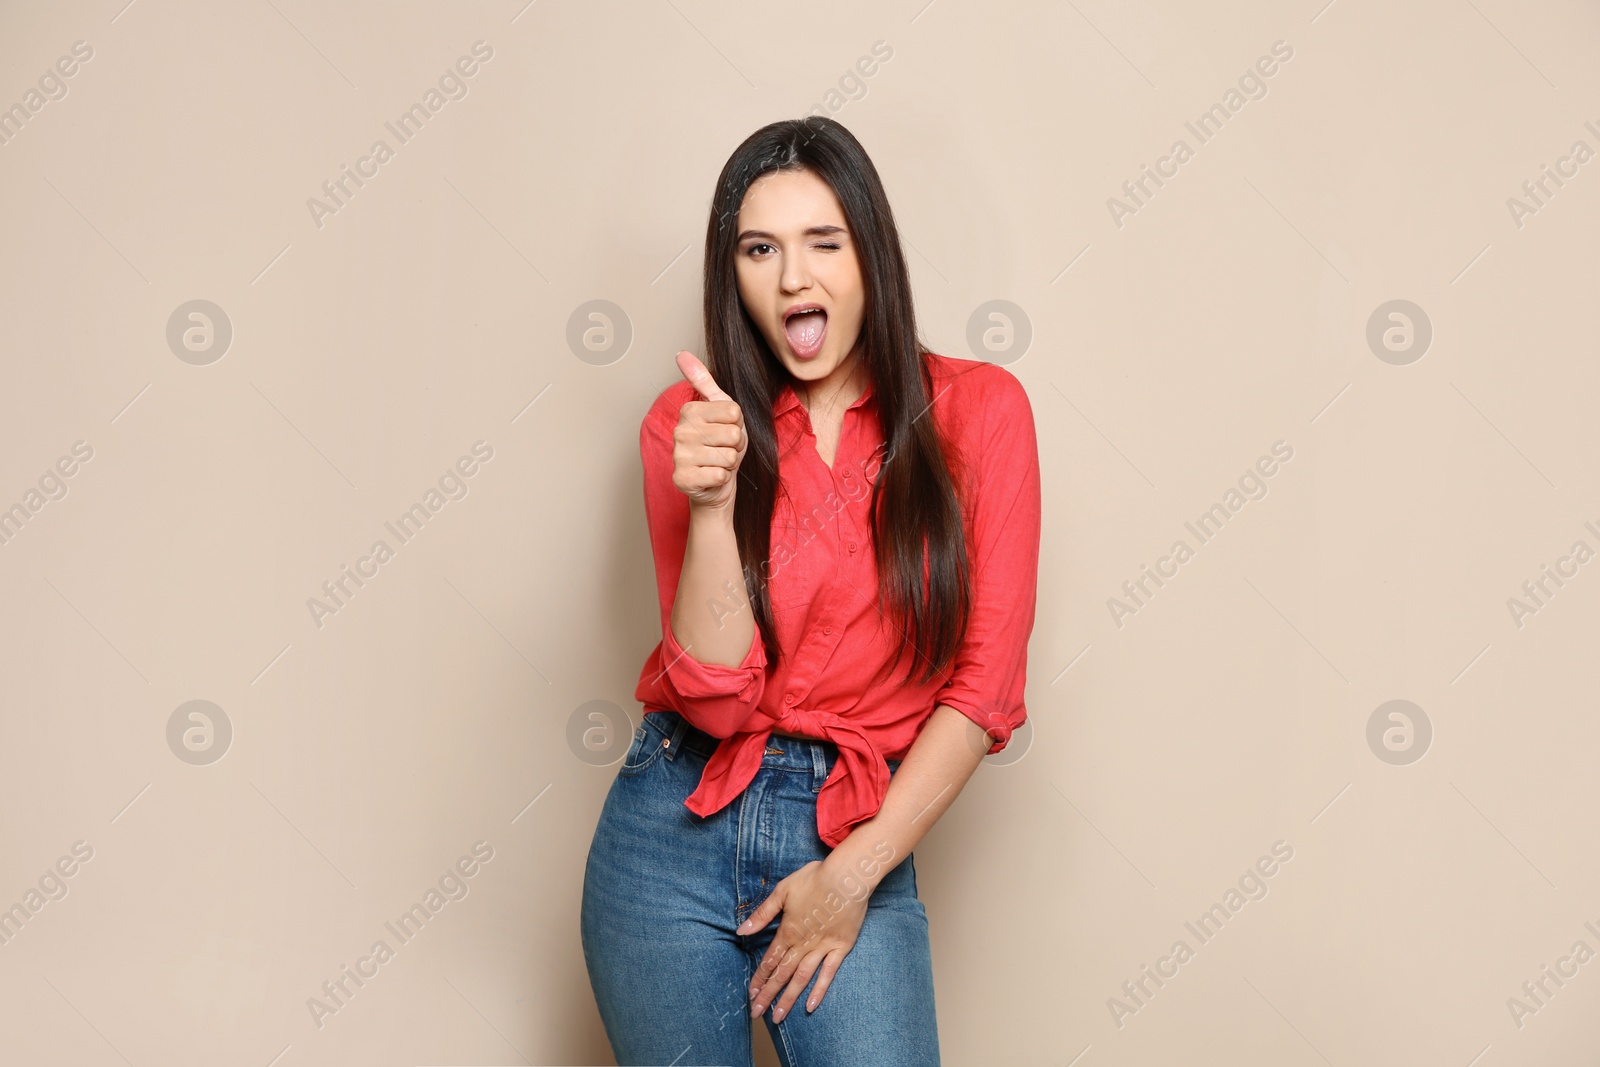 Photo of Portrait of beautiful young woman in stylish clothes on color background